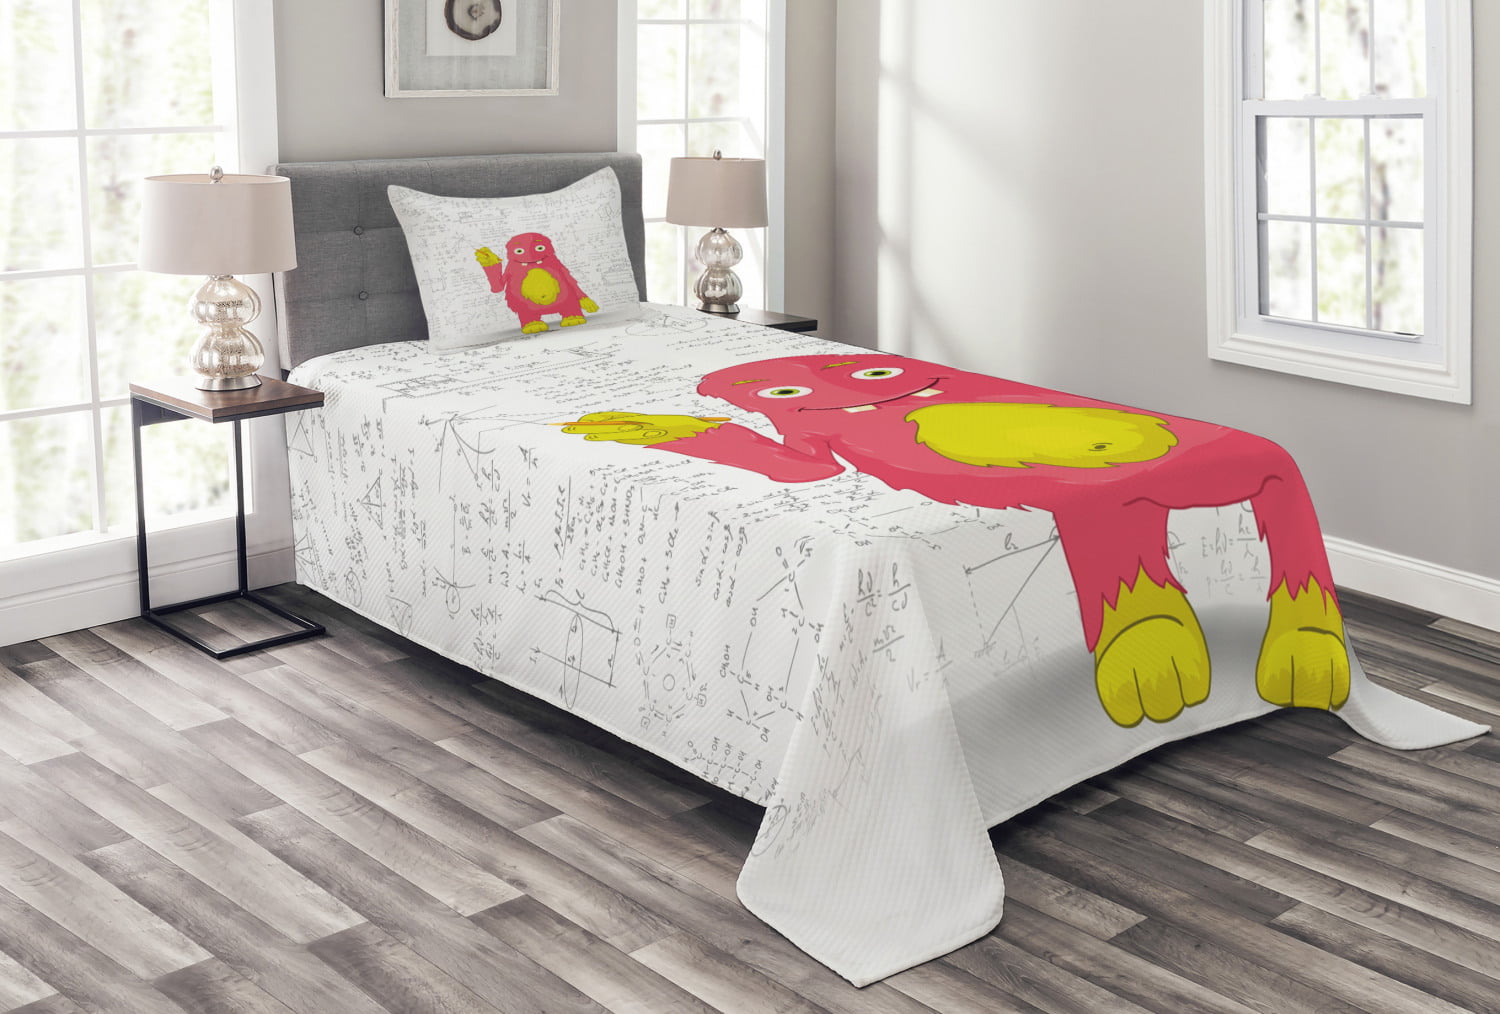 Cute Bear Bees Honey Comic Print Details about   Kids Quilted Bedspread & Pillow Shams Set